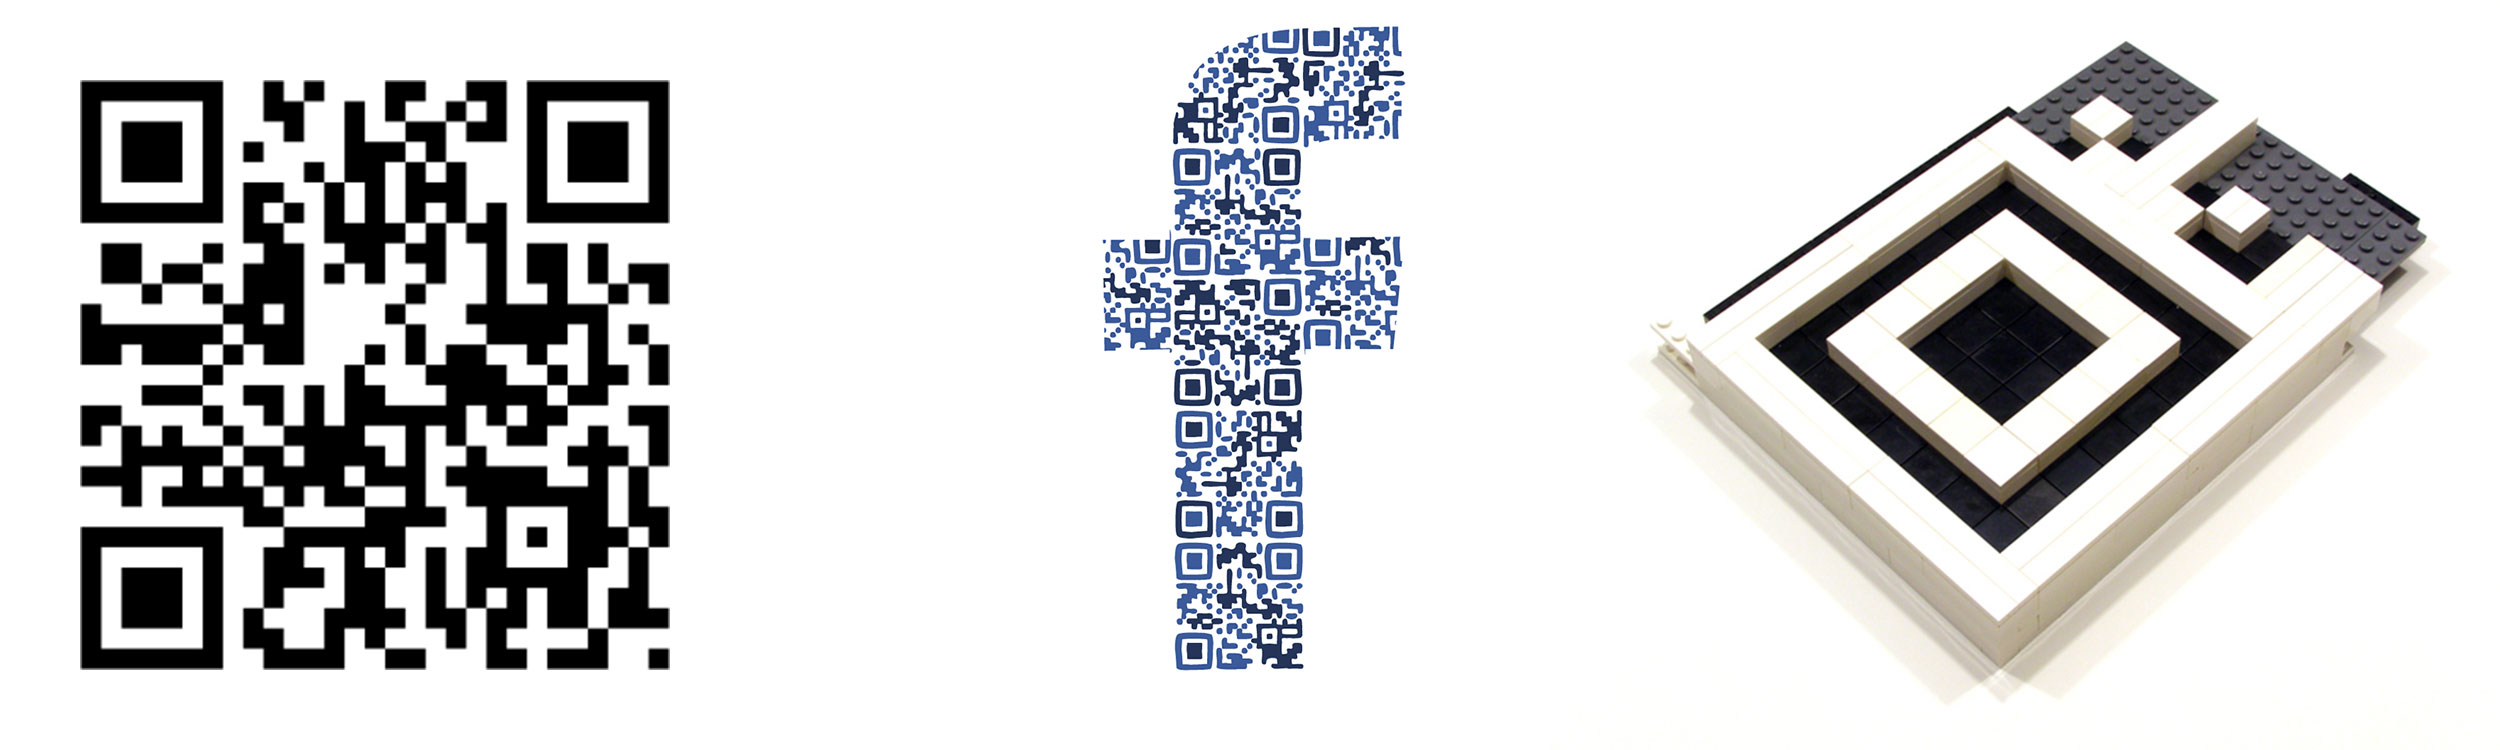 The standard visualization of a QR code, include the Facebook "f" logo comprised of a QR code.